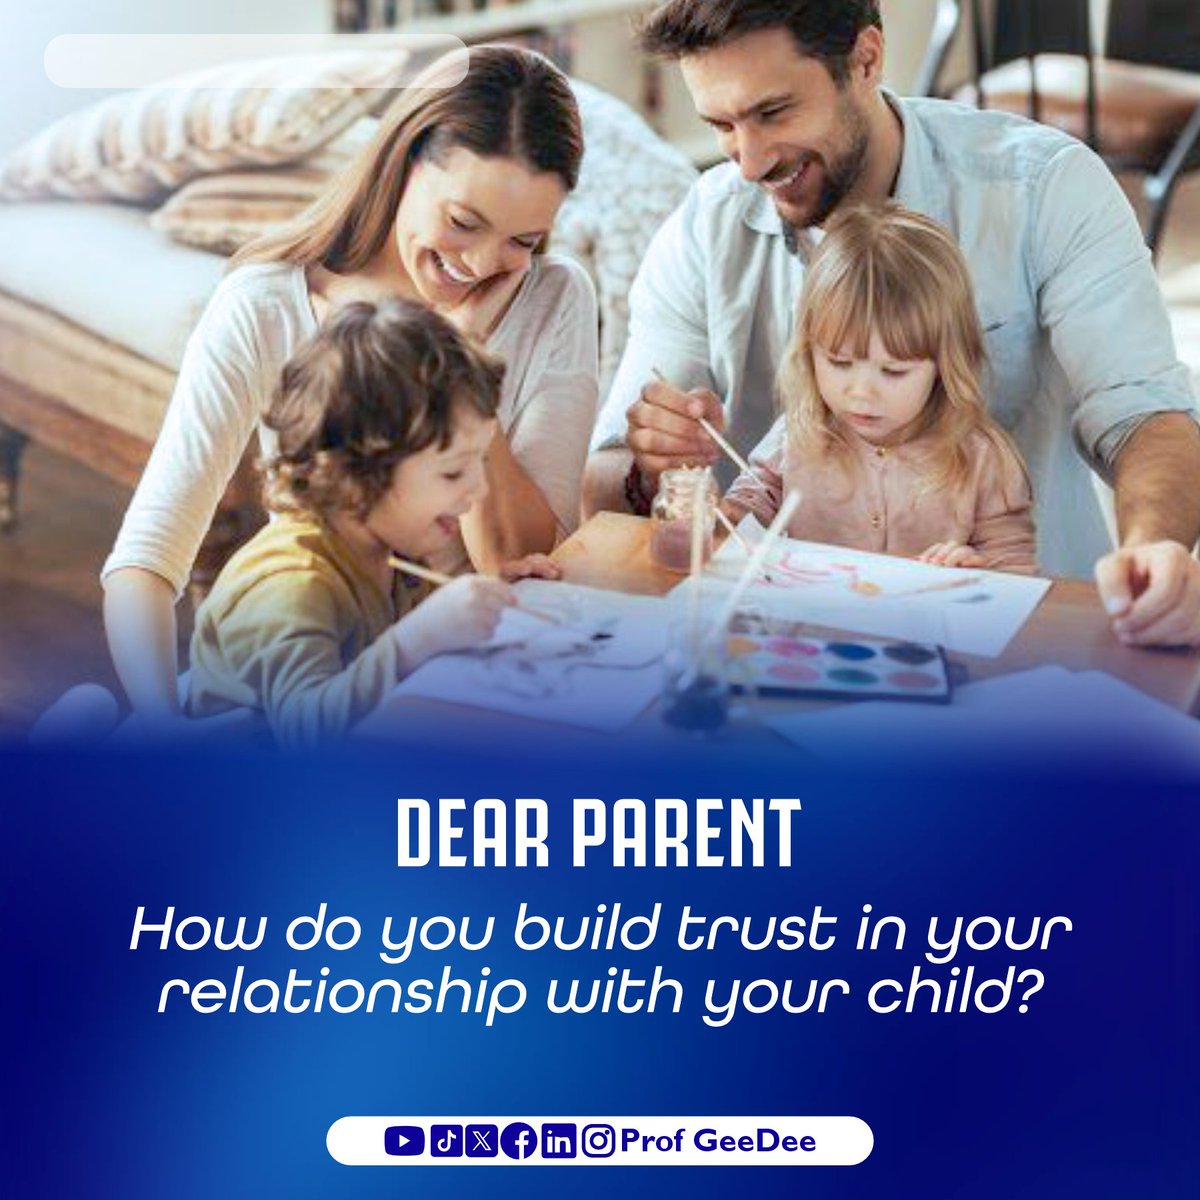 By working together, you can build a solid foundation for success.

Remember, teamwork makes the dream work!

#earlyyears
#earlylearning
#earlychildhooddevelopment
#dearparentseries
#profgeedee